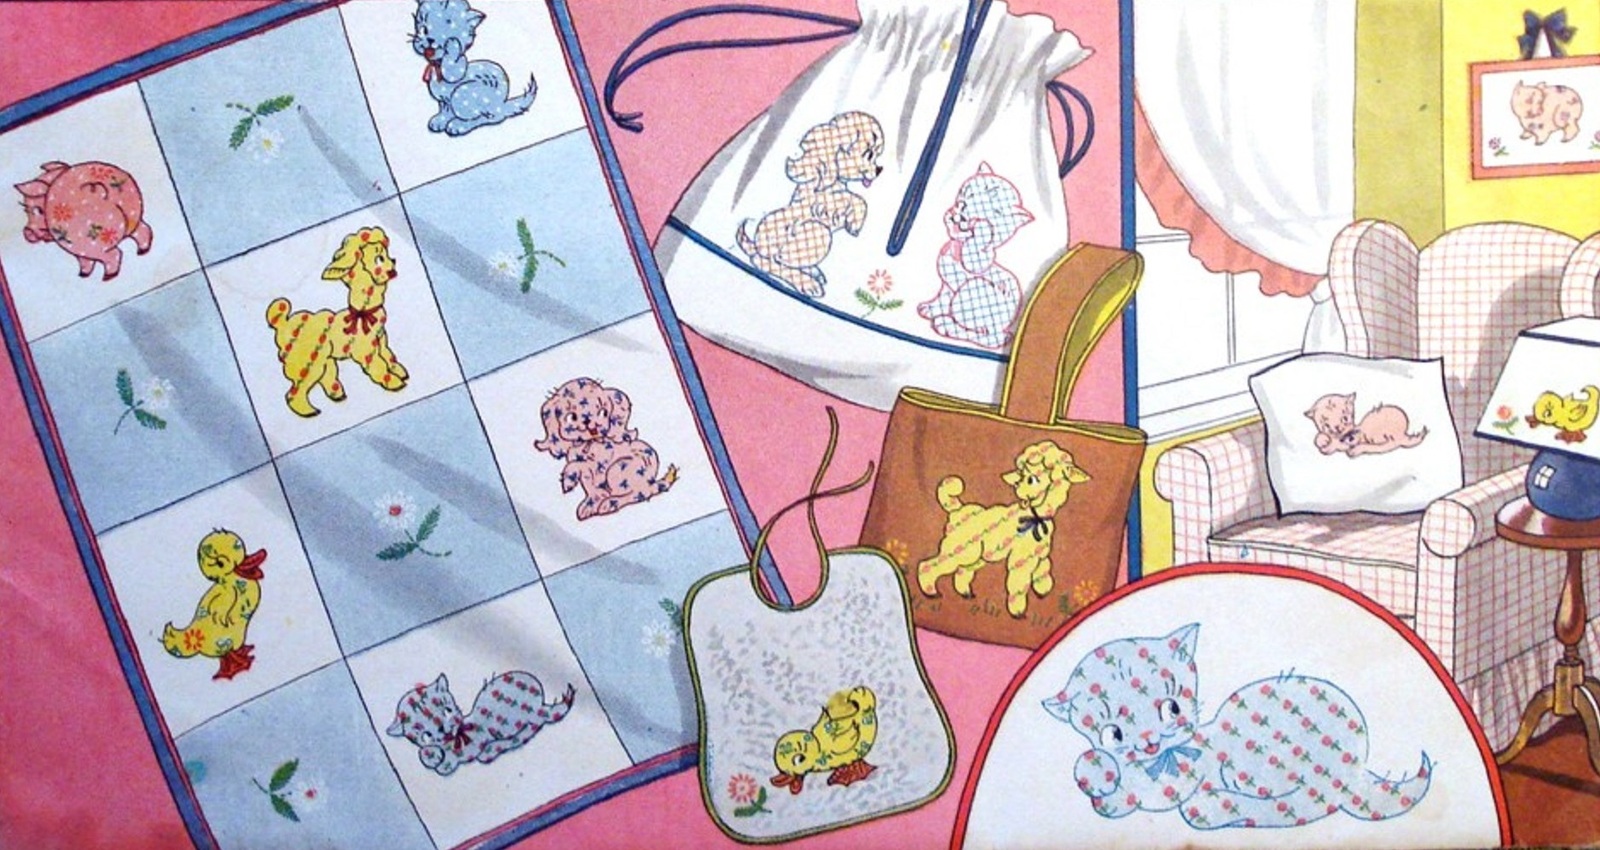 5 Nursery Pets in applique & embroidery quilt pattern V154  - $5.00